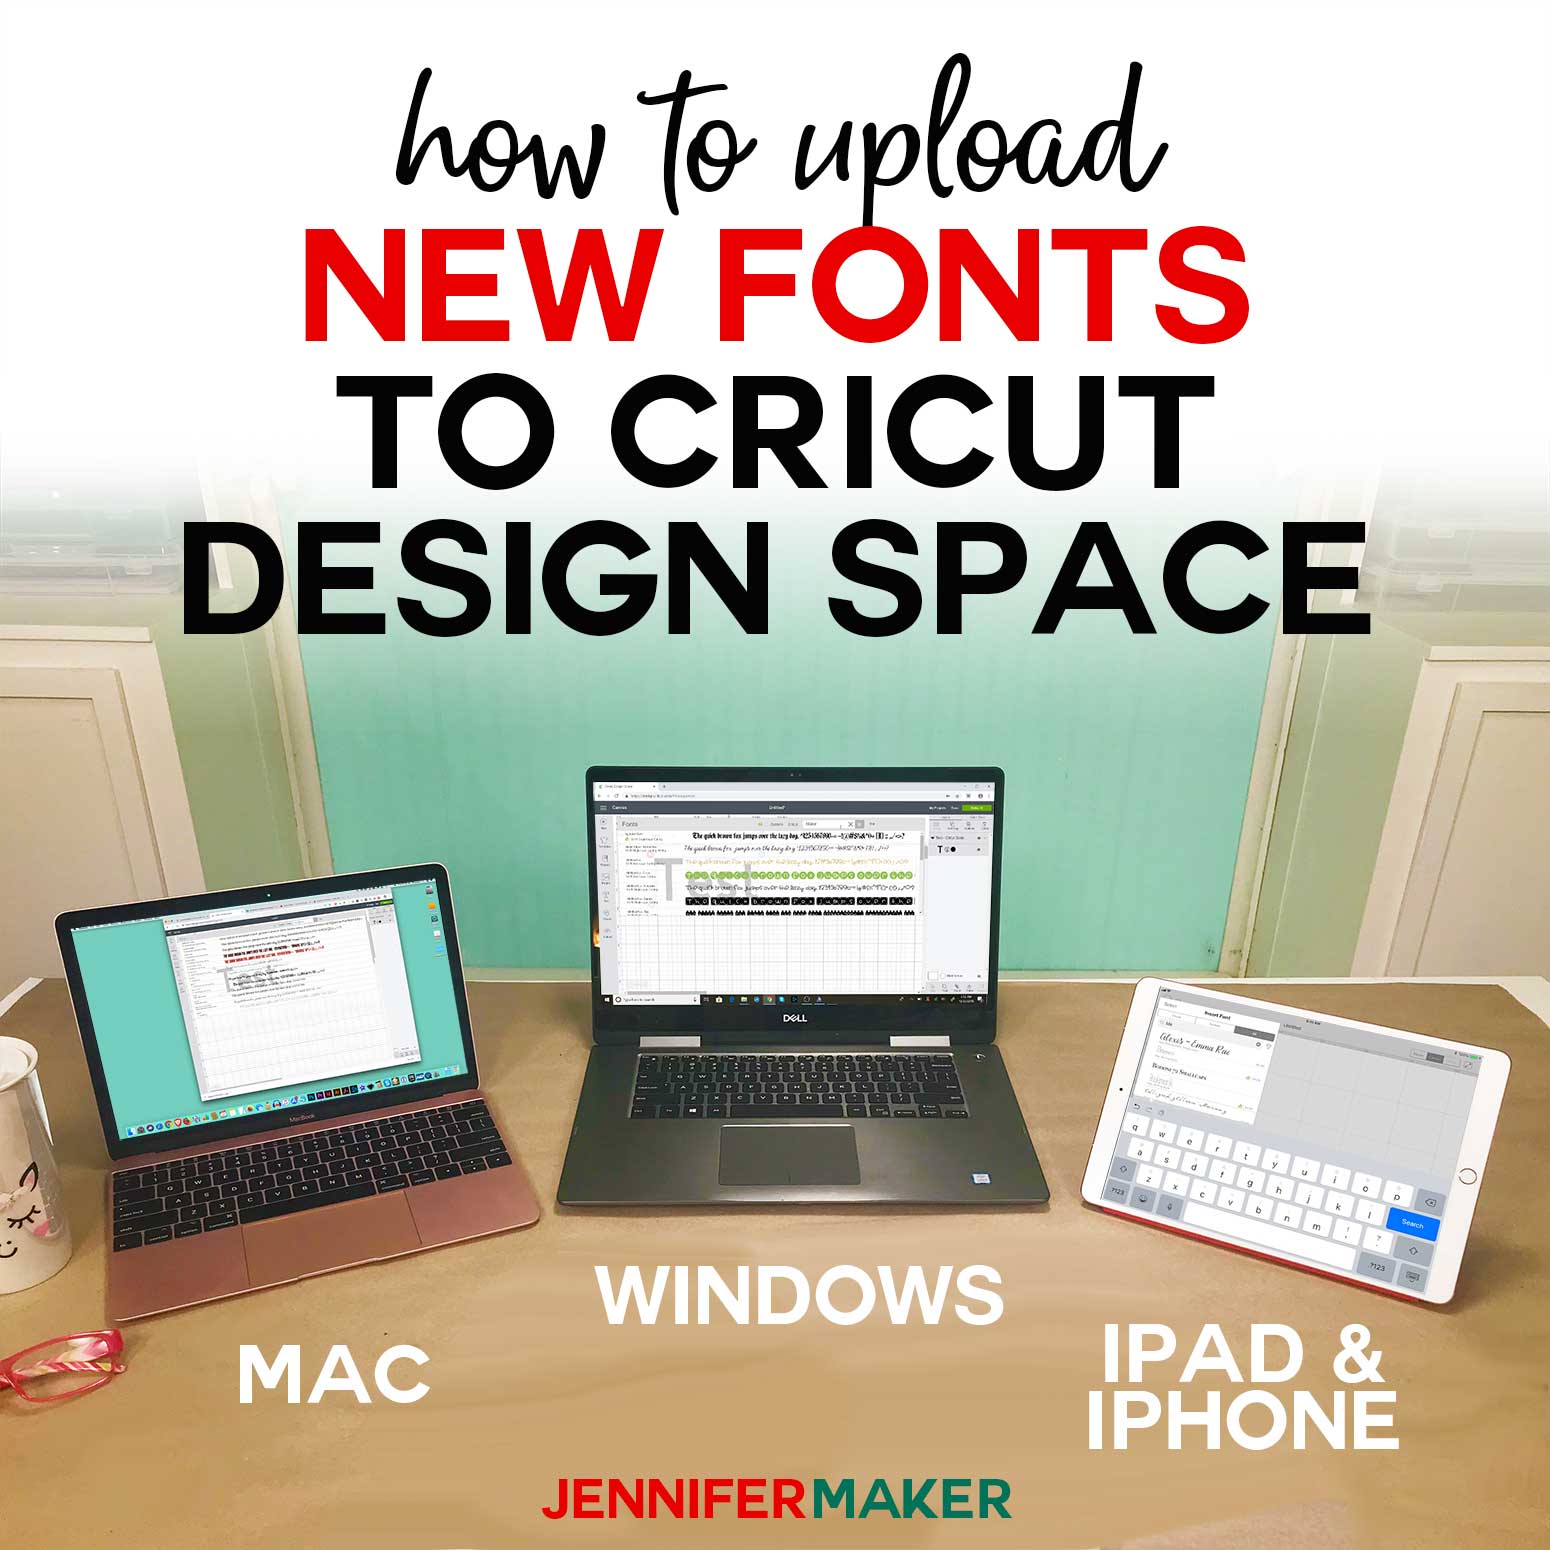 How to Upload Fonts to Cricut Design Space on Windows, Mac, iPad, and iPhone -- tutorial and free font! #cricut #font #designspace #windows #mac #ipad